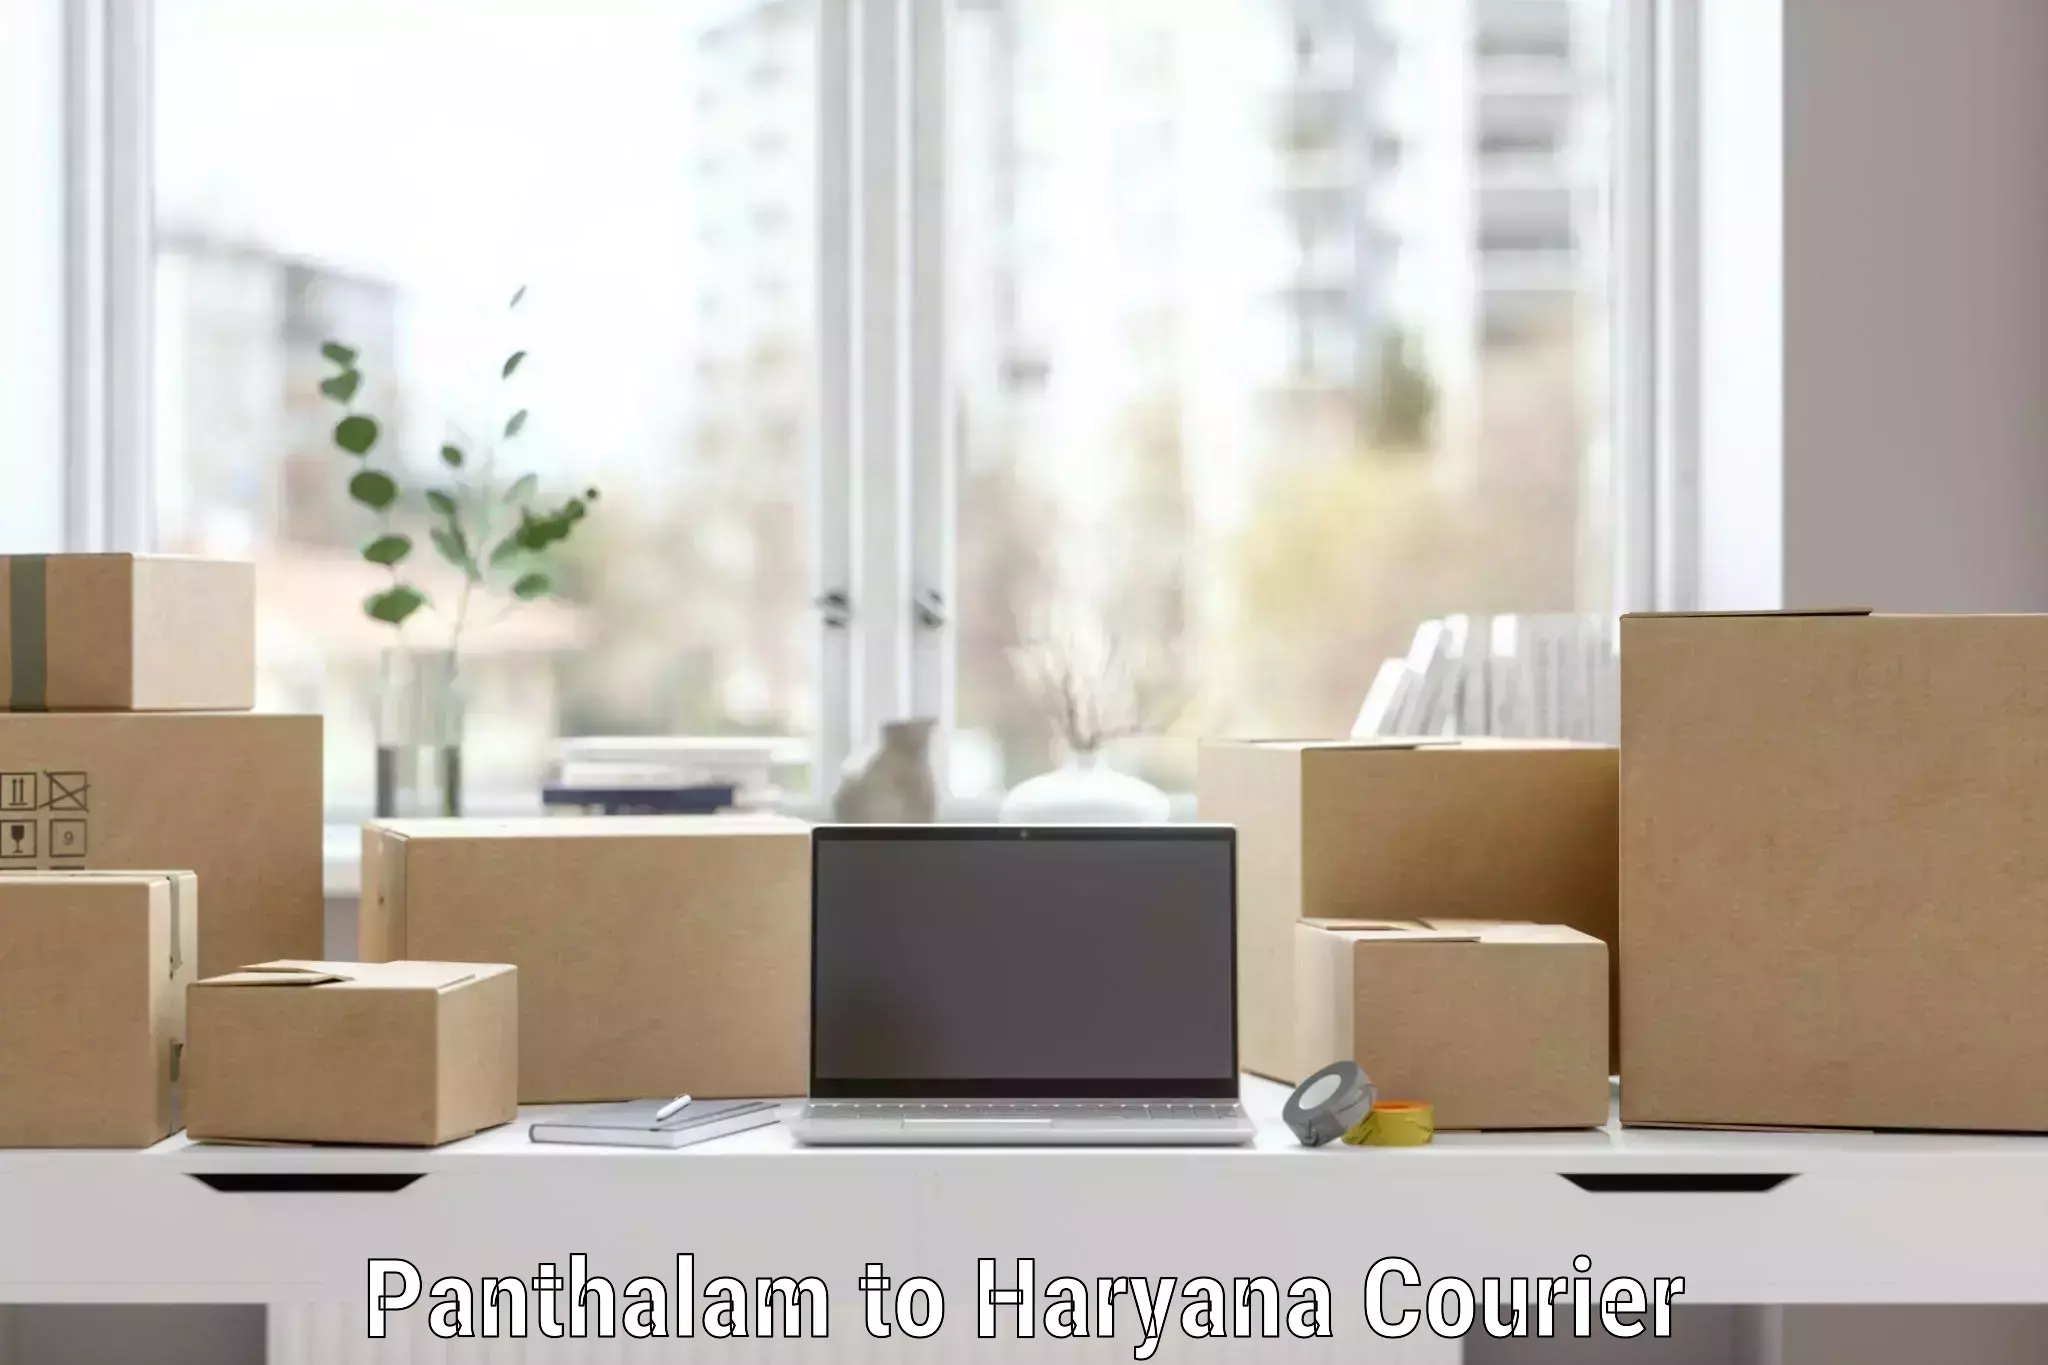 Trusted relocation experts Panthalam to Hodal